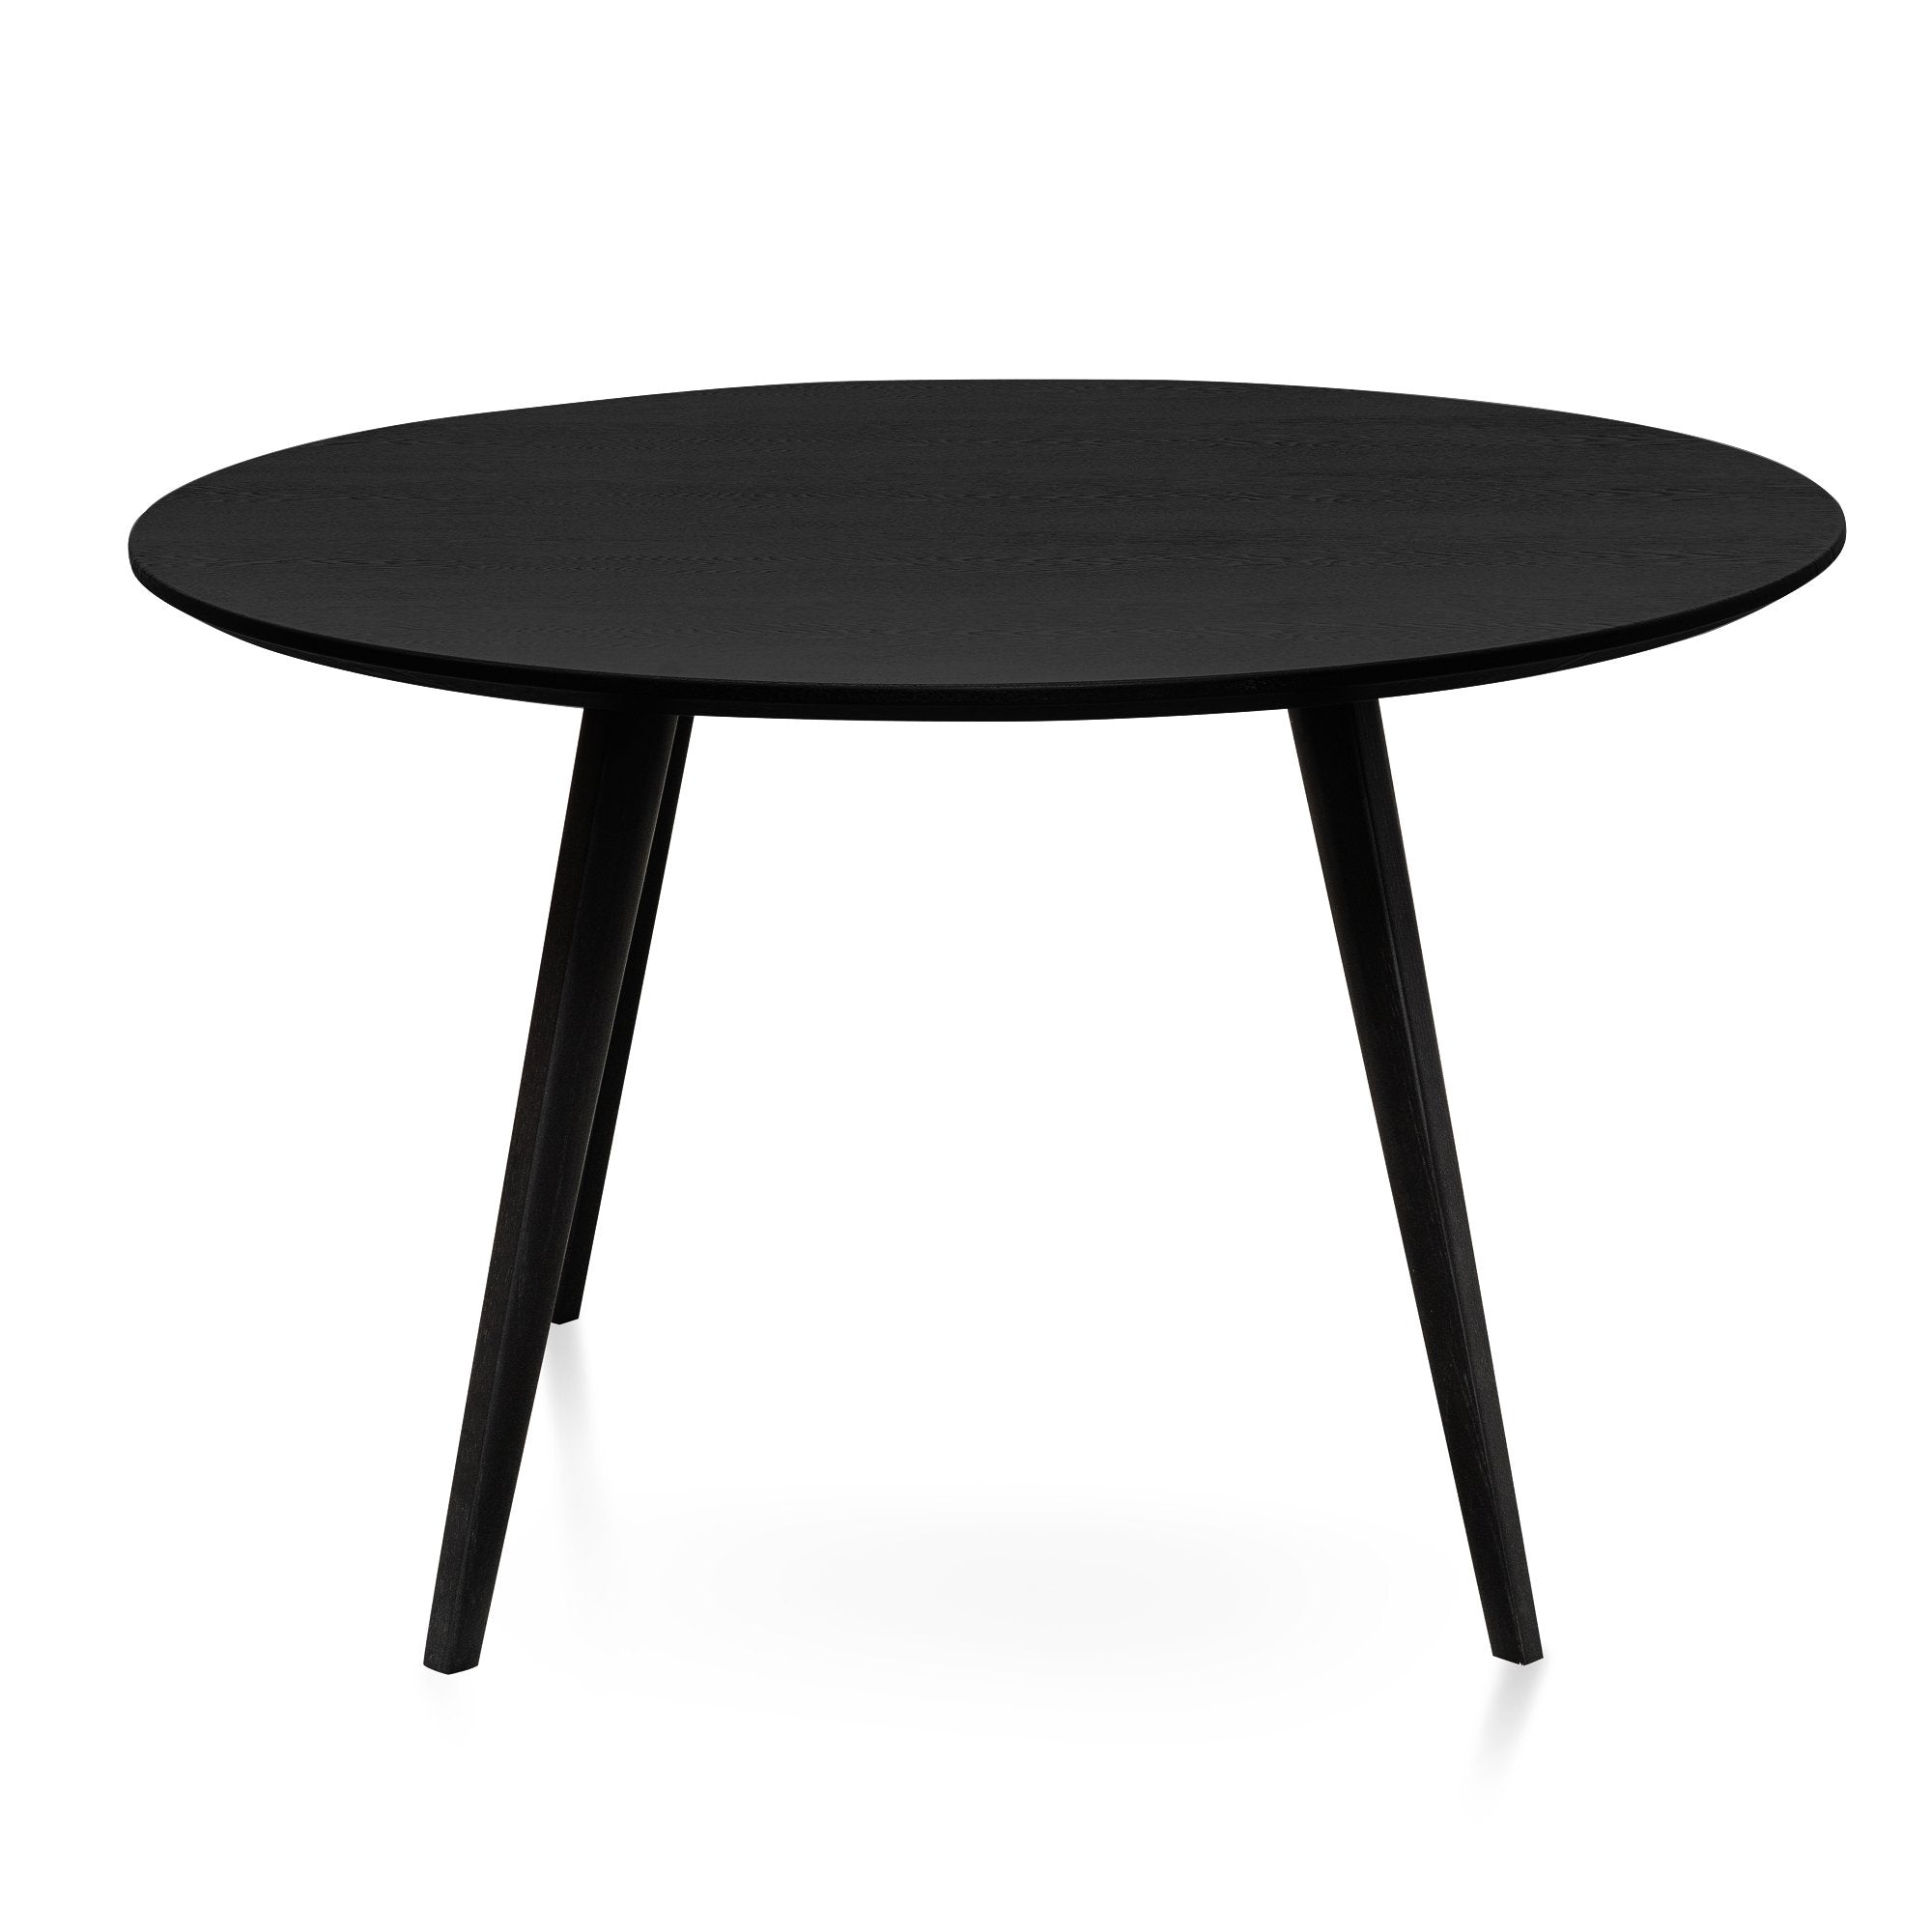 Smith 1.2m Wooden Round Dining Table - Full Black - Dining Tables